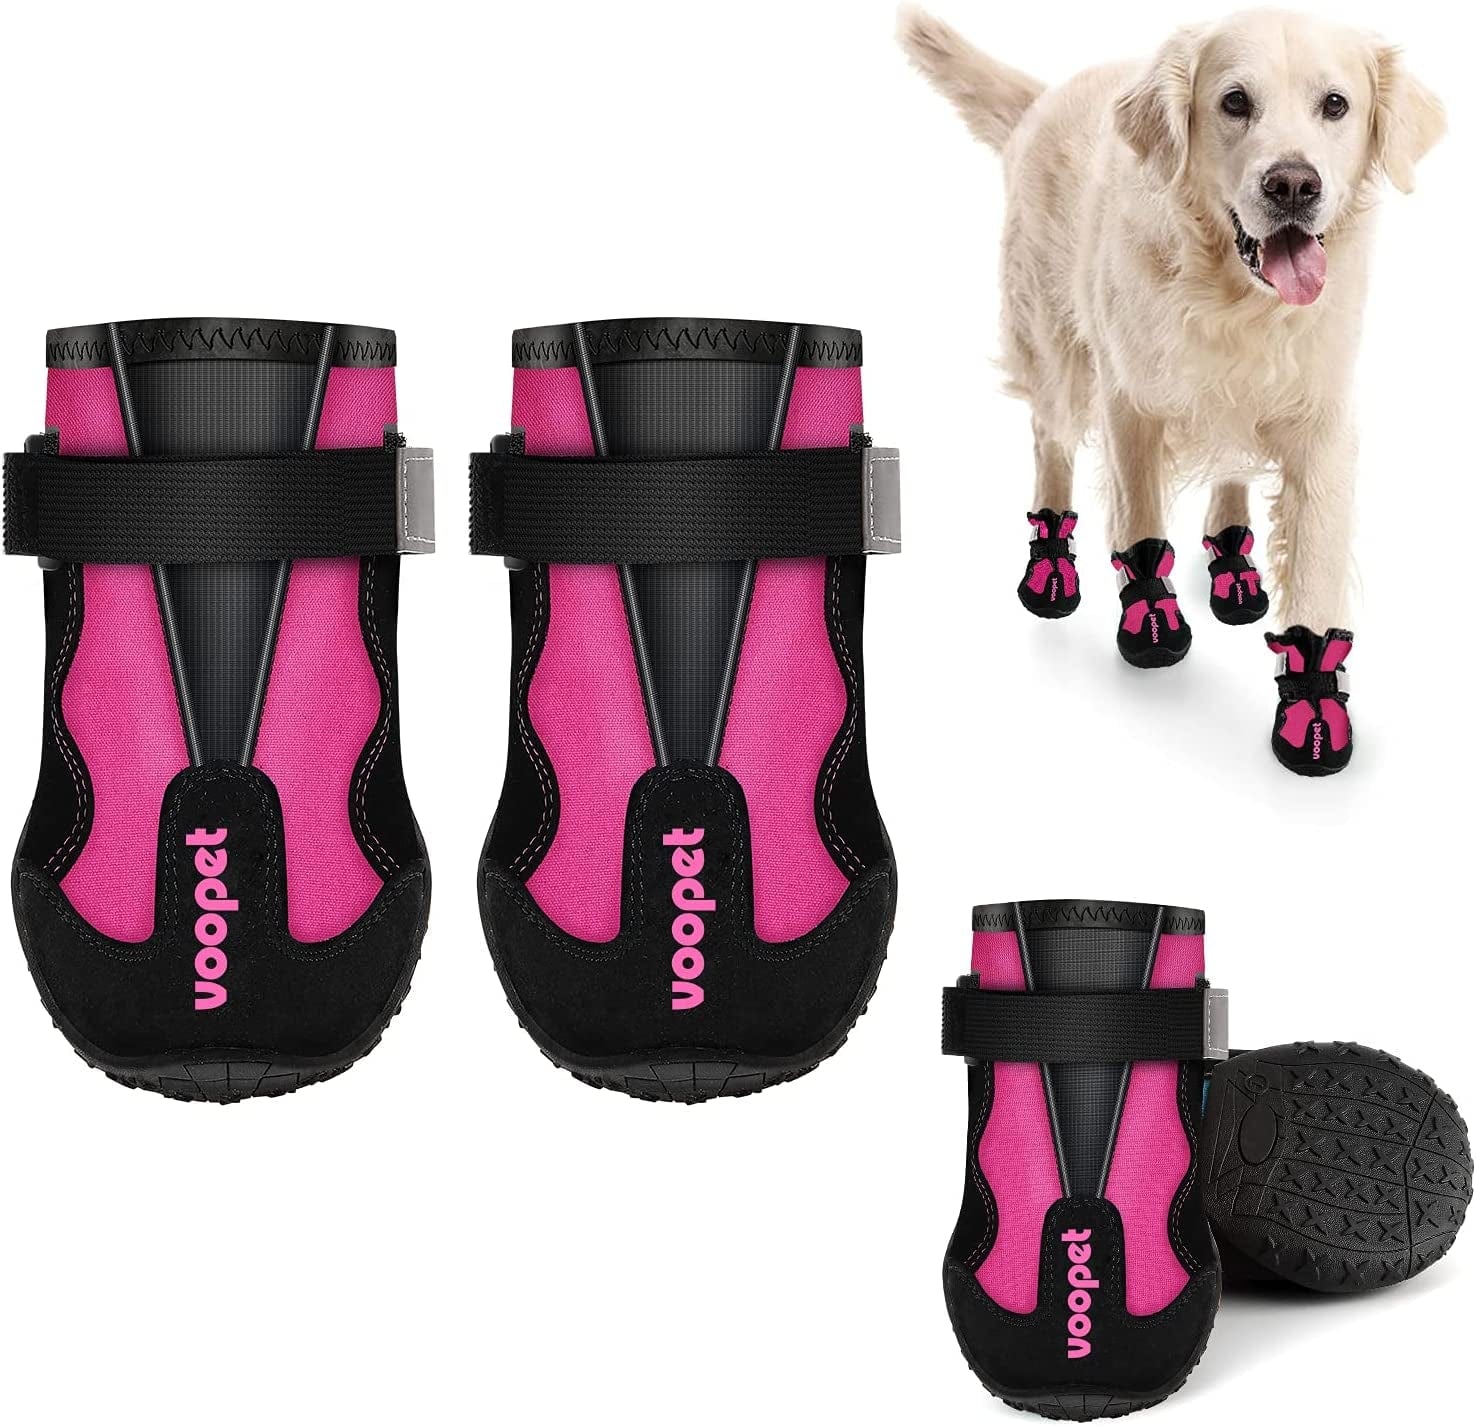 Dog Boots That Stay ON Waterproof Dog Boots Pink Dog Shoes 